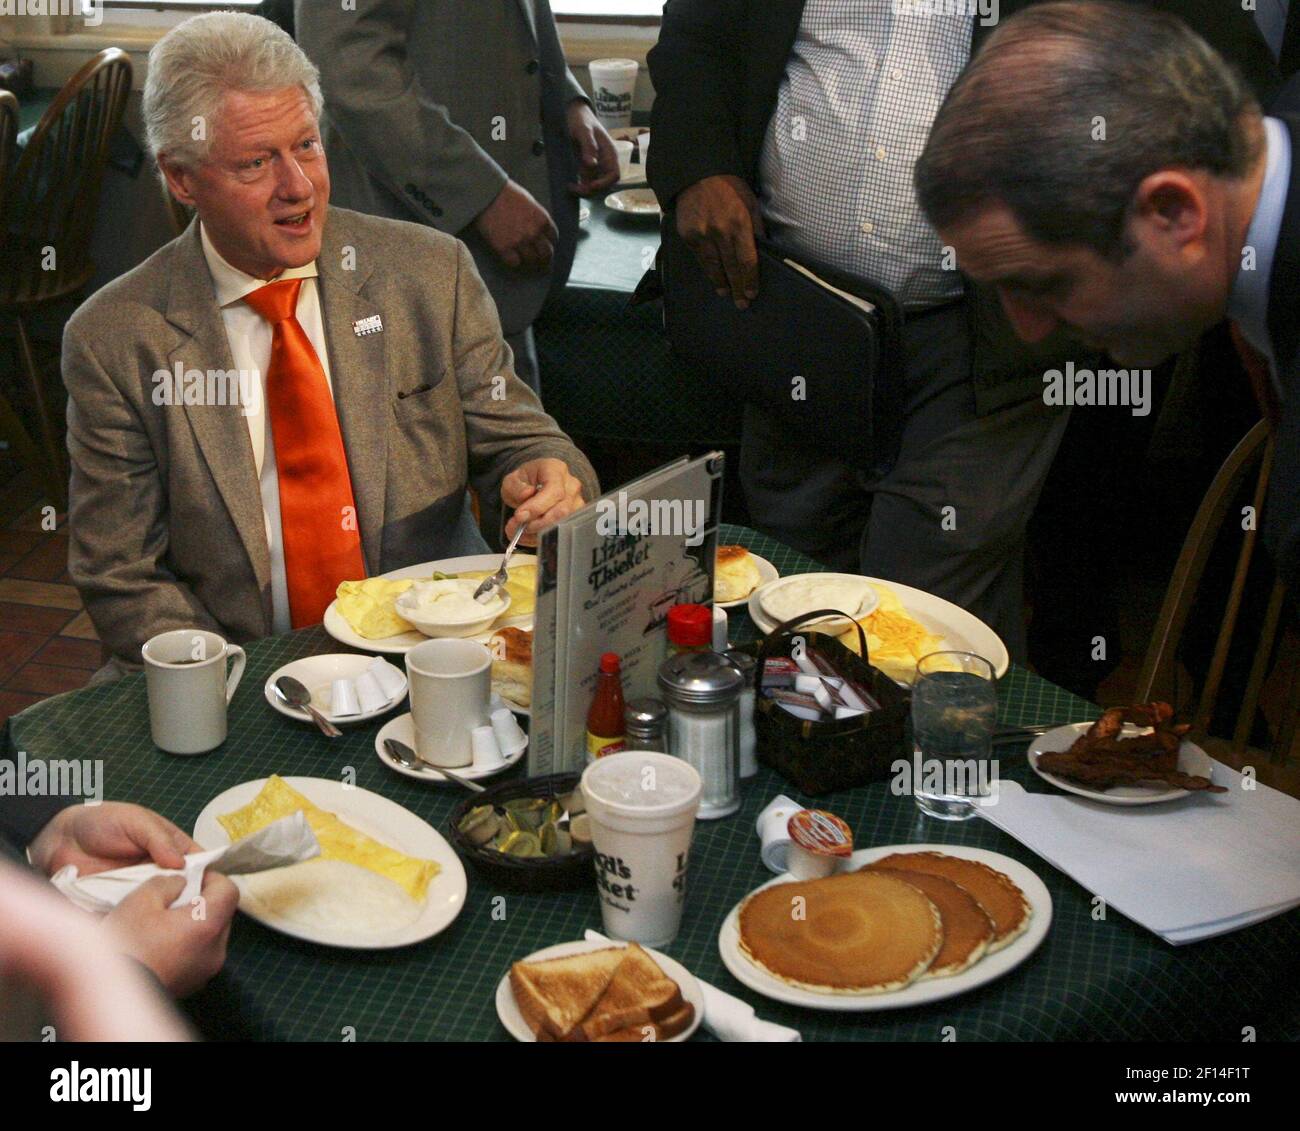 Former President Bill Clinton enjoys breakfast, Tuesday morning, January 22, 2008, at the Lizard's Thicket in Columbia, South Carolina, where Clinton was campaigning for his wife Hillary. (Photo by Jeff Blake/The State/MCT/Sipa USA) Stock Photo